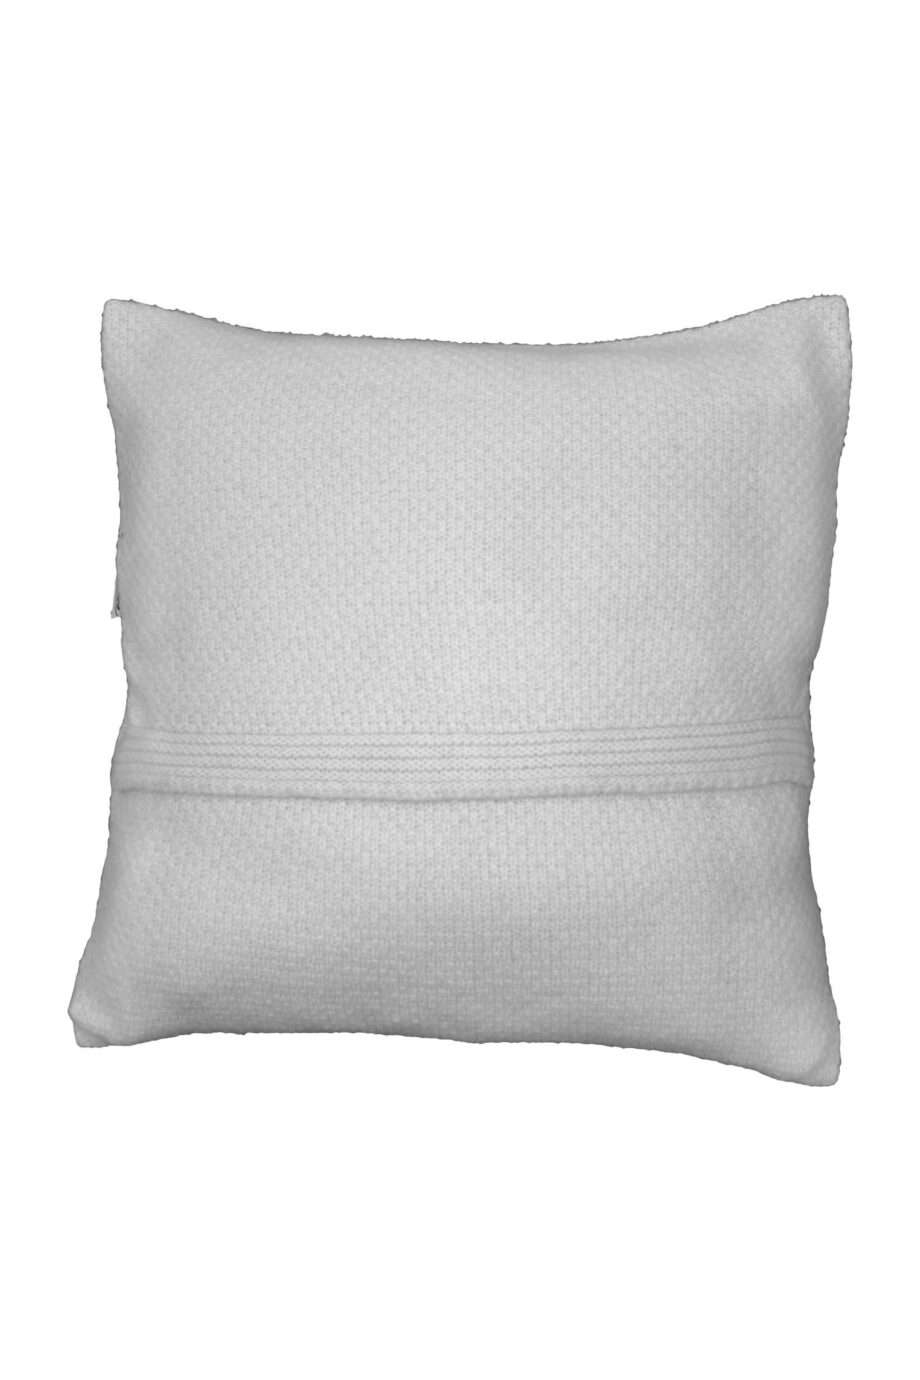 rice white knitted woolen pillowcase xsmall